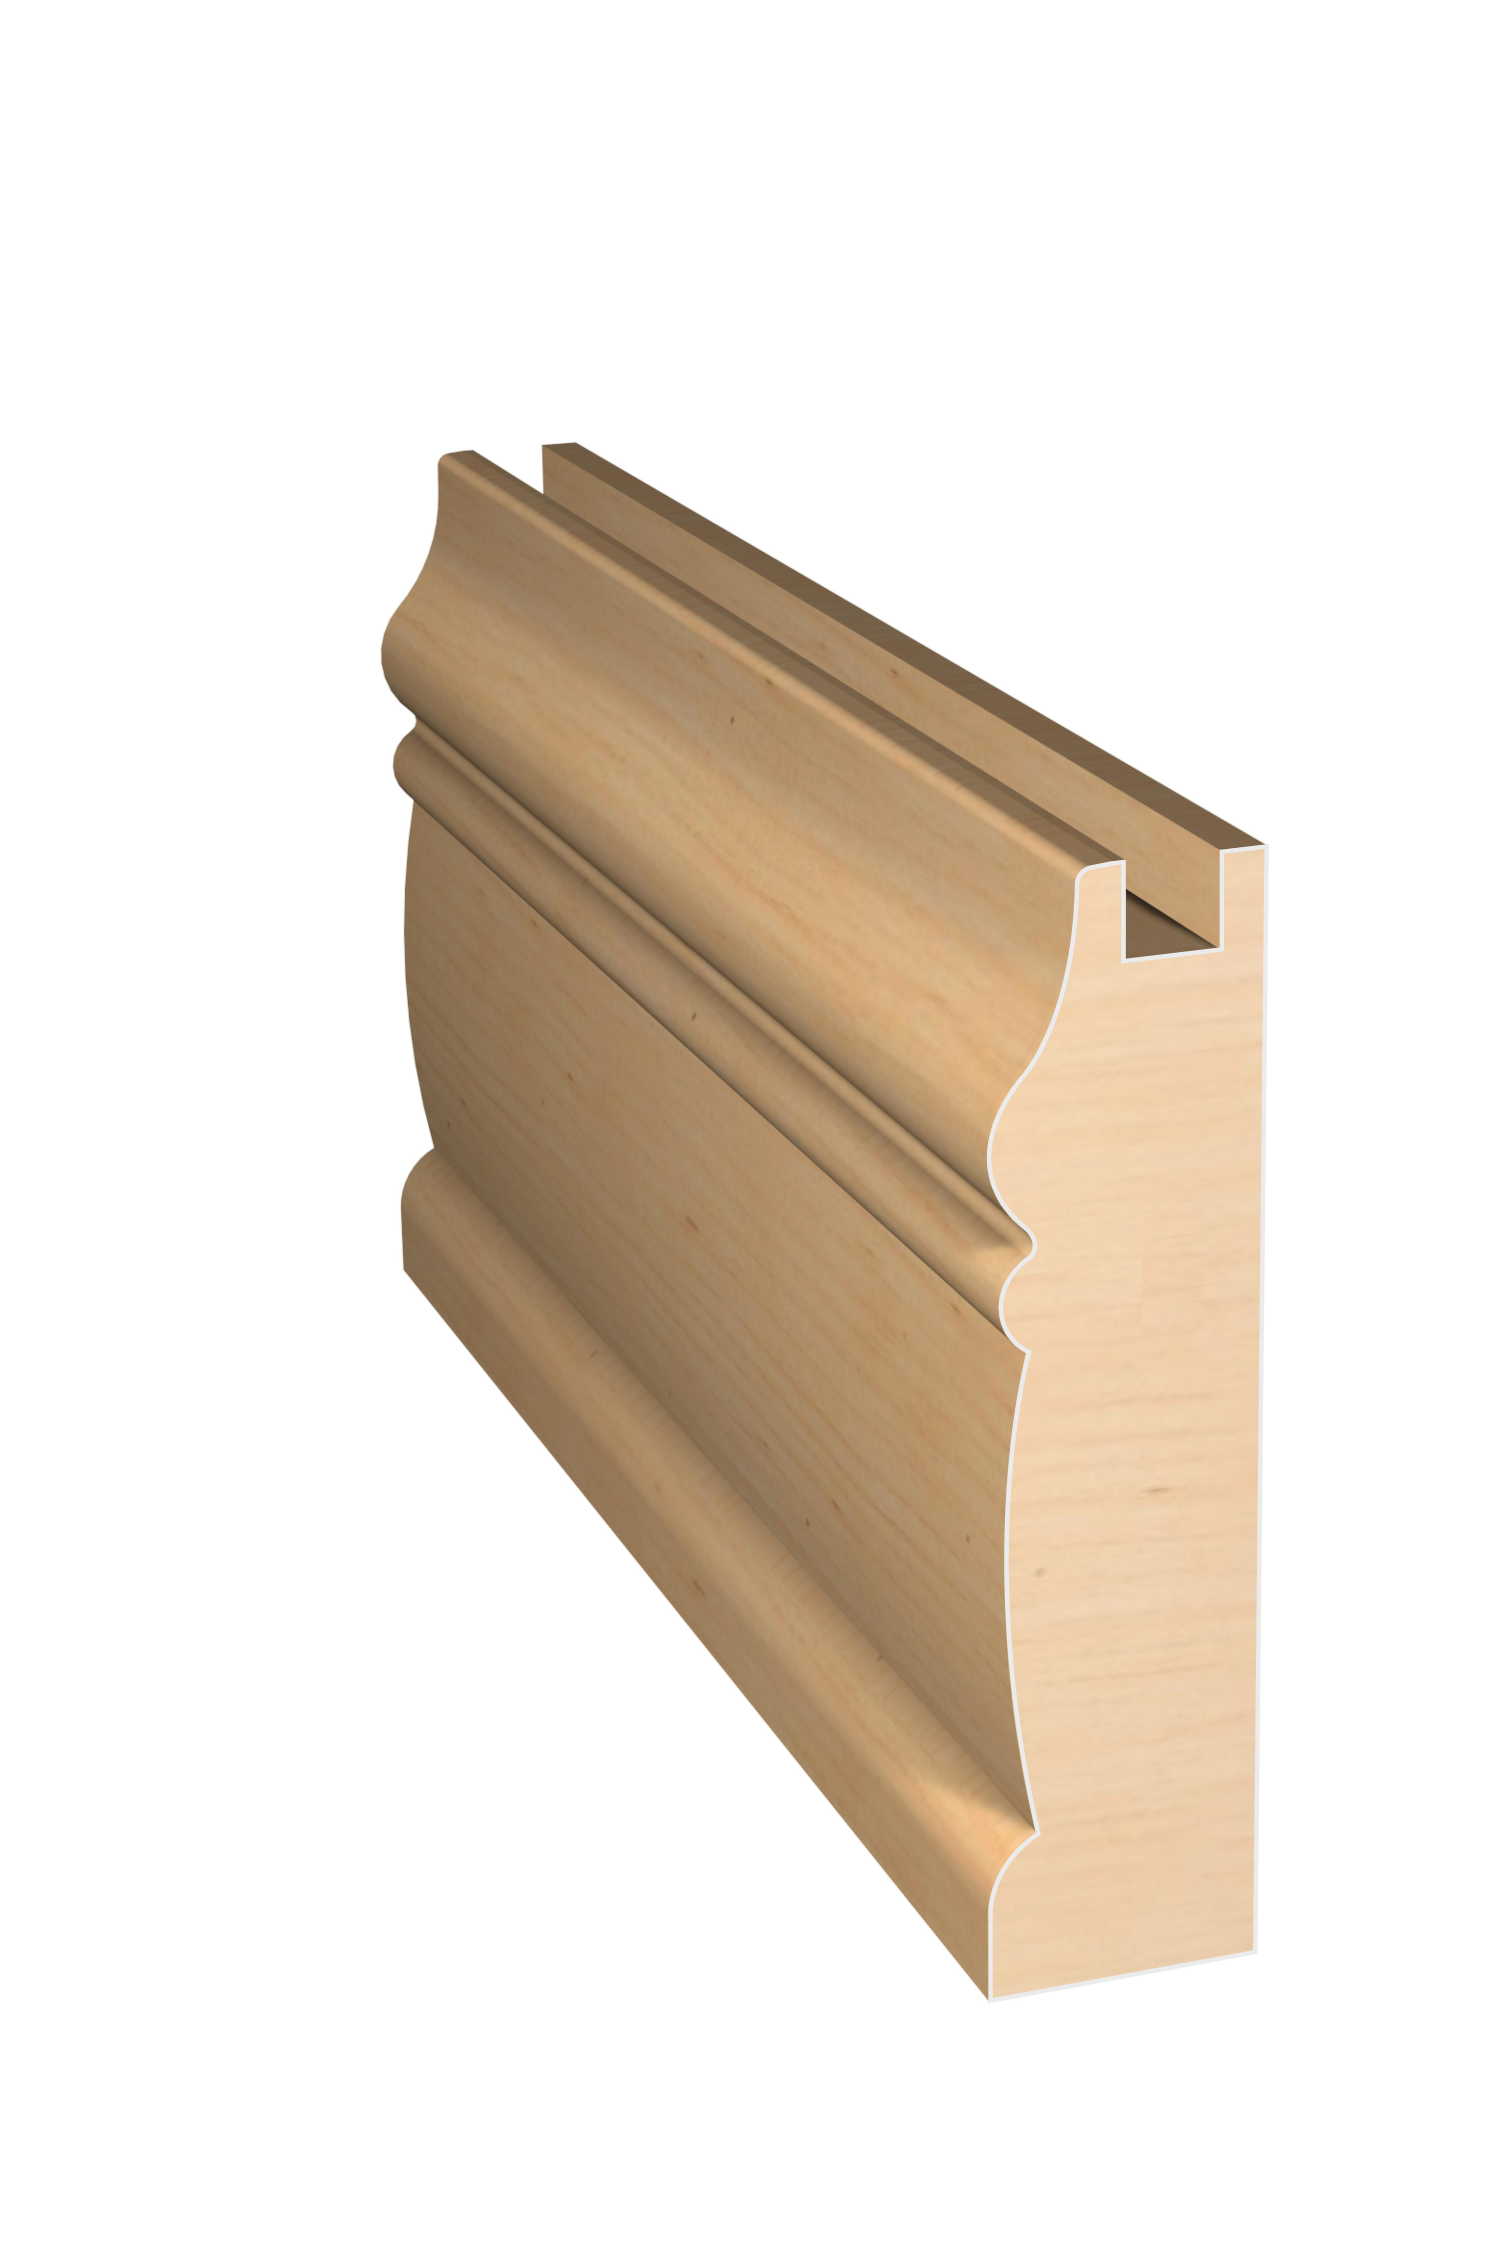 Three dimensional rendering of custom cabinet rail wood molding CABPL37 made by Public Lumber Company in Detroit.